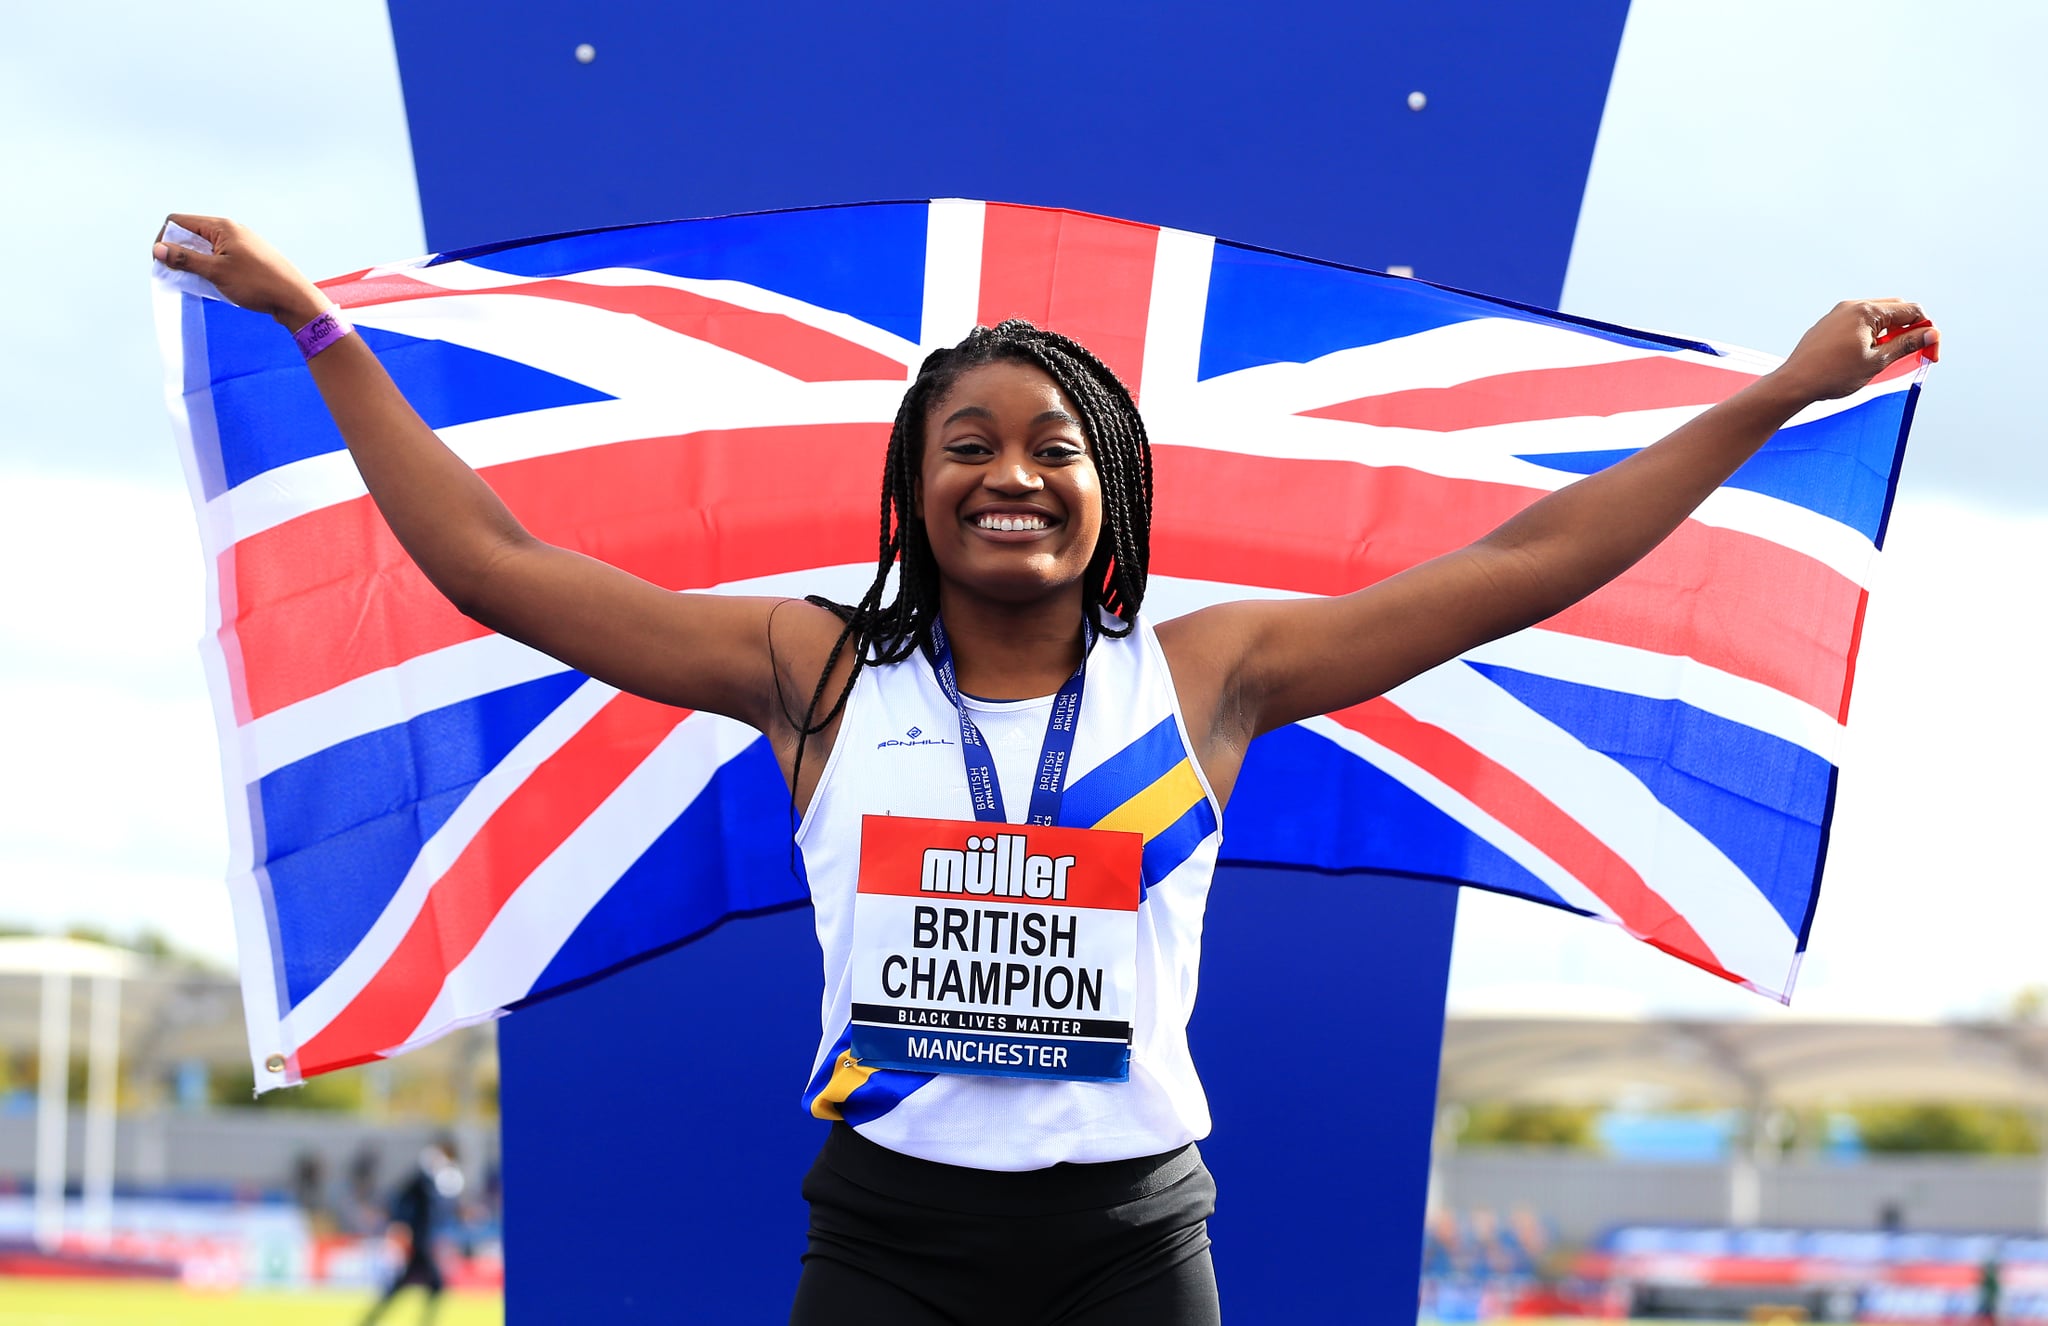 MANCHESTER, ENGLAND - SEPTEMBER 05: In this handout image provided by British Athletics, Gold Medalist, Naomi Ogbeta of Great Britain poses during the medal ceremony for the Women's Triple Jump event during Day Two of the Muller British Athletics Championships at Manchester Regional Arena on September 05, 2020 in Manchester, England. (Photo by British Athletics - Handout/British Athletics via Getty Images)